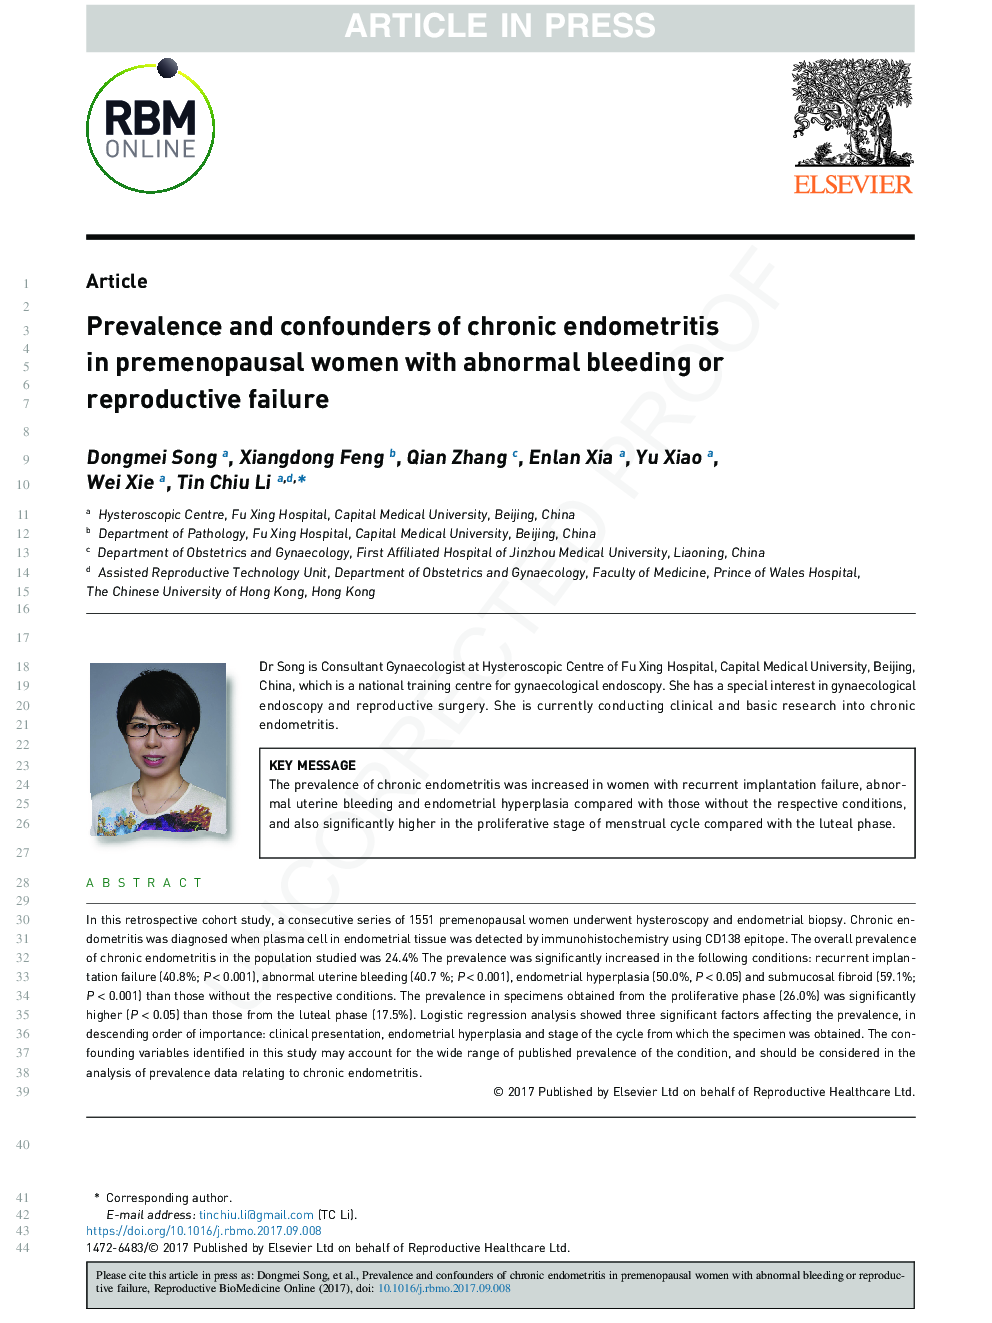 Prevalence and confounders of chronic endometritis in premenopausal women with abnormal bleeding or reproductive failure